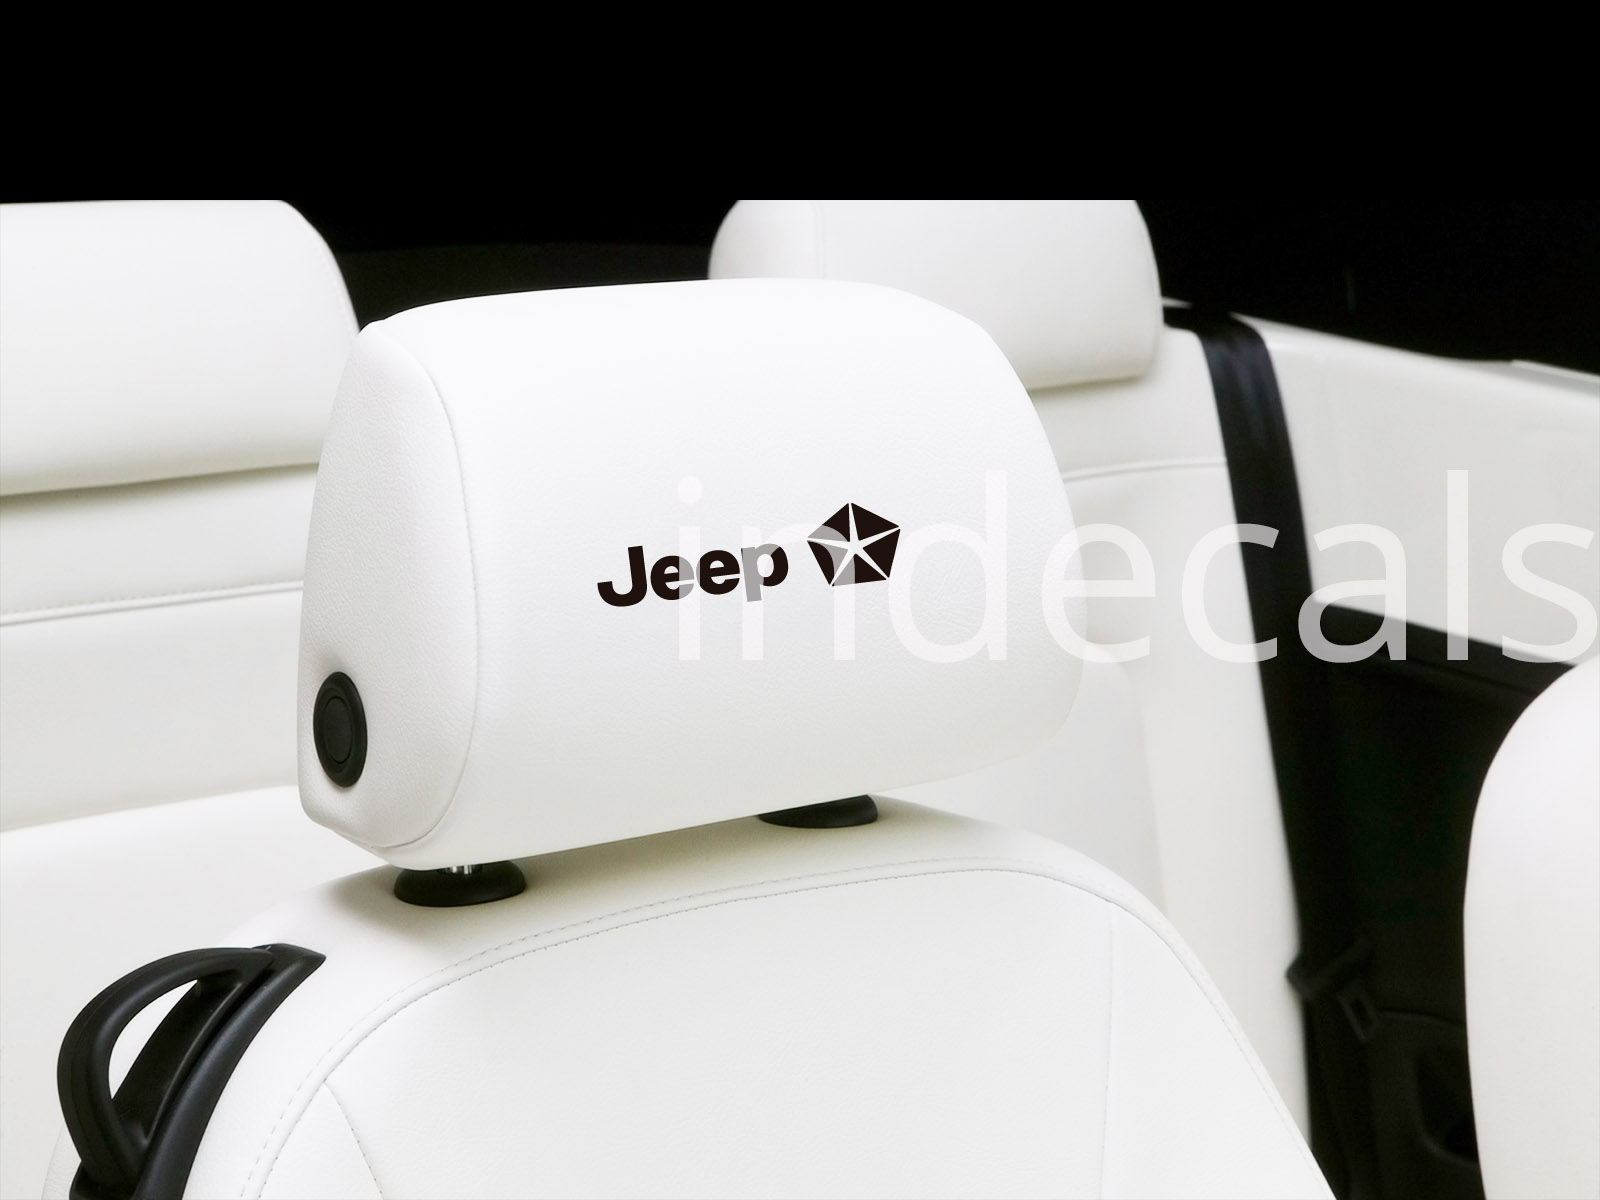 6 x Jeep Stickers for Headrests - Black